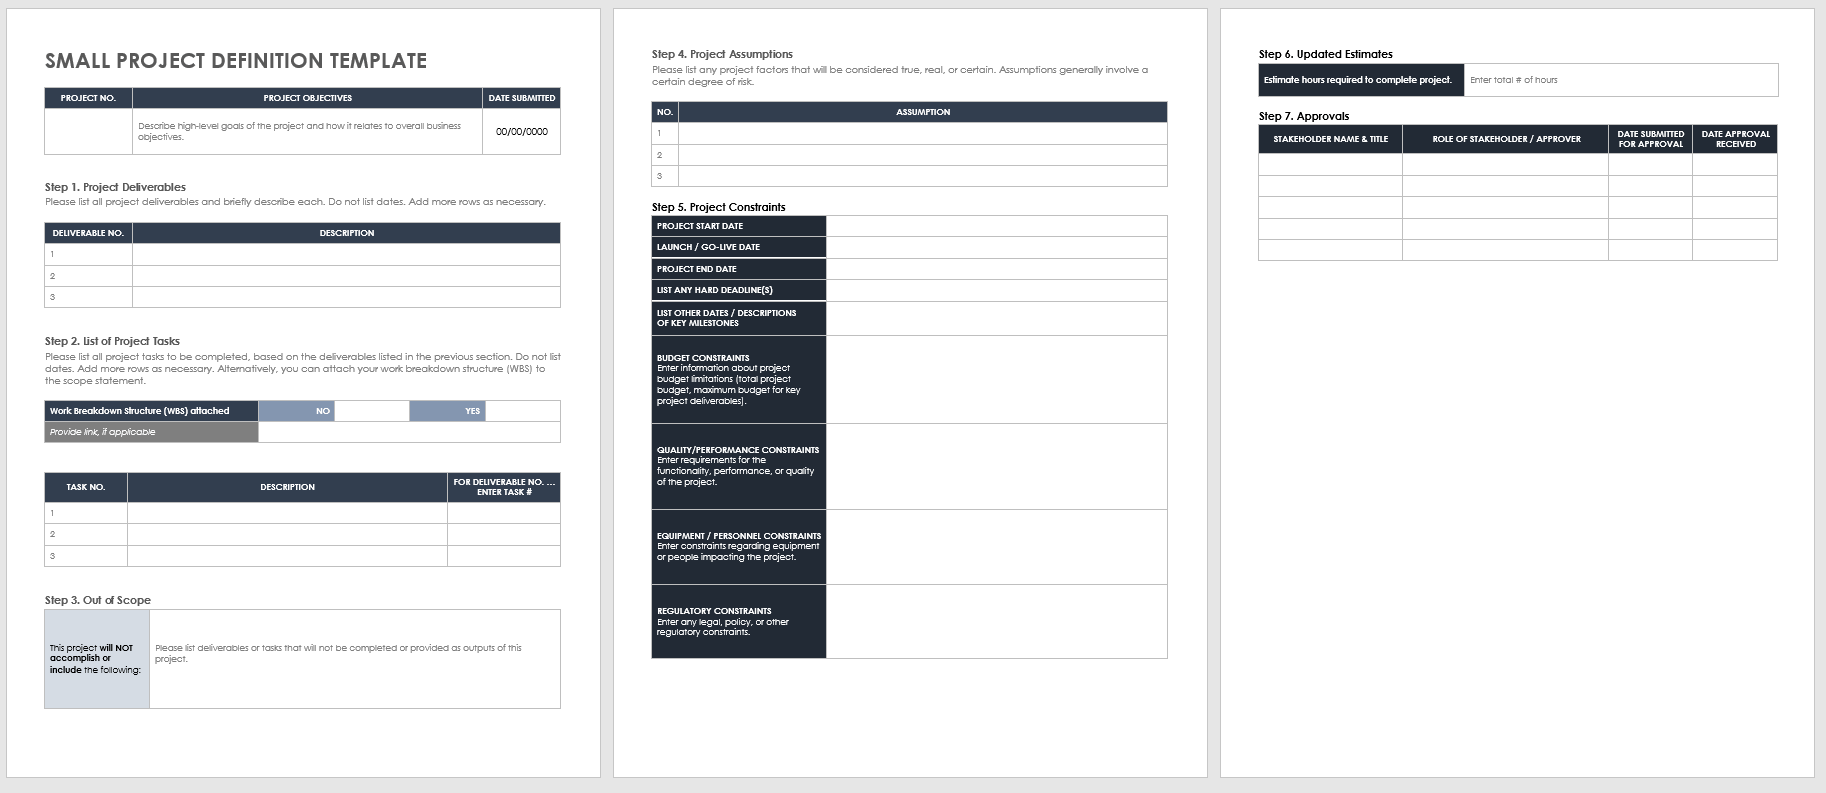 Small Project Definition Template